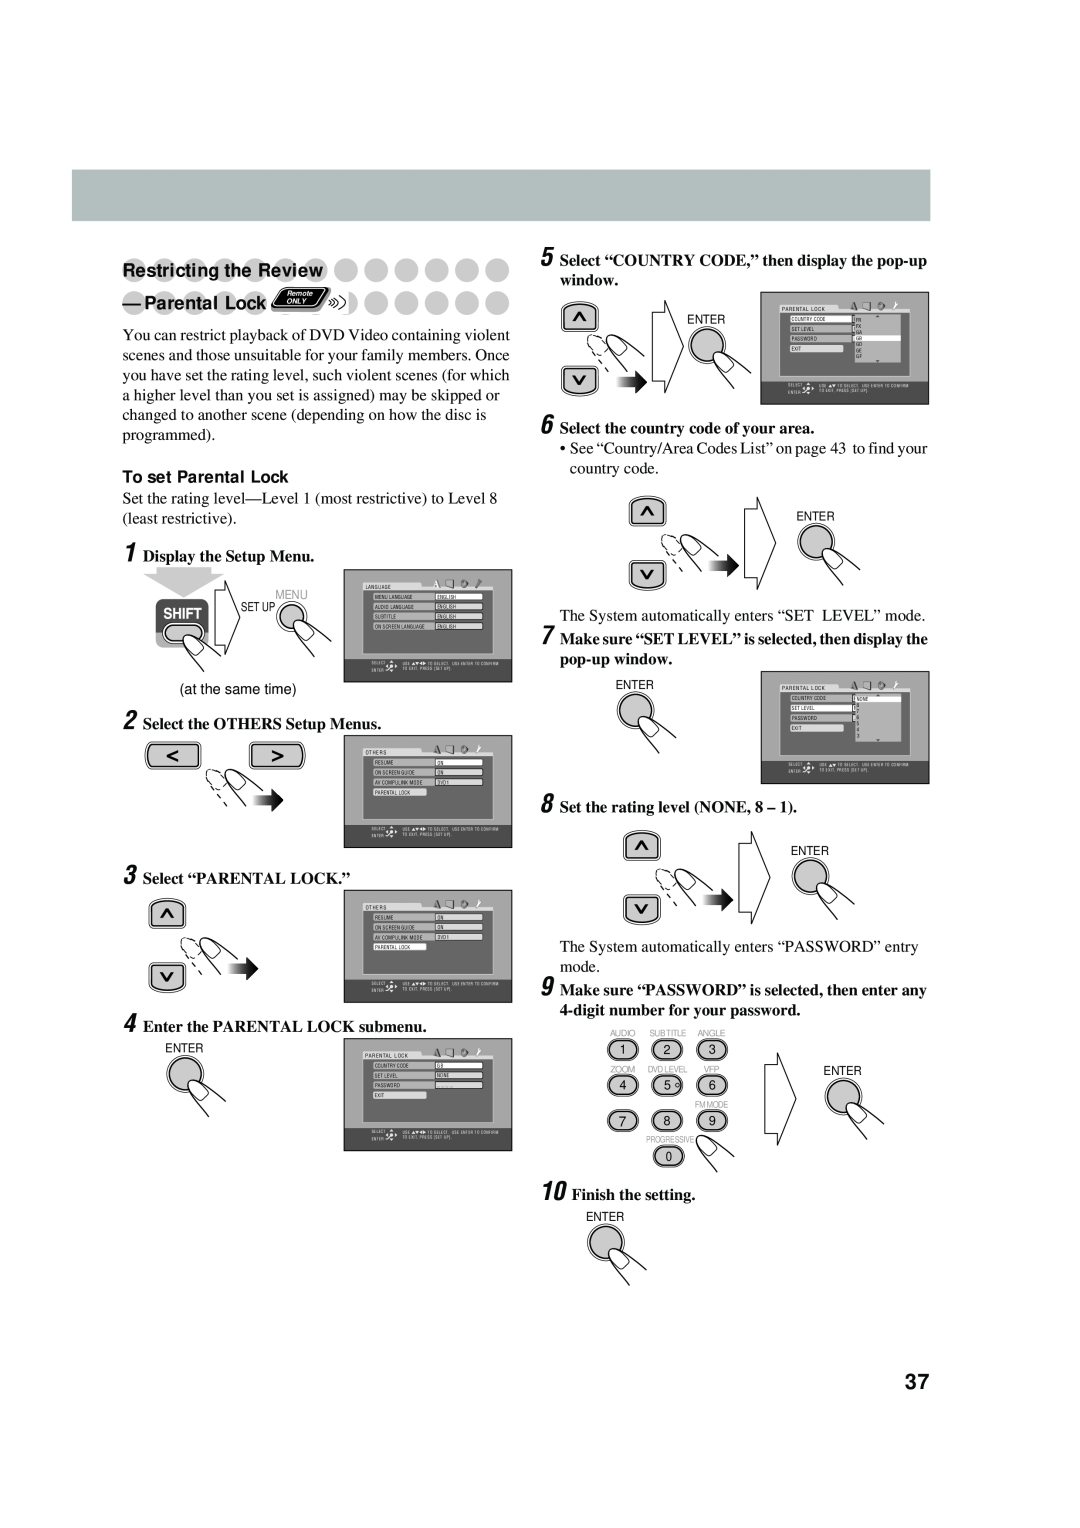 JVC UX-P550 Restricting the Review, ParentalLock ONLY, To set Parental Lock, Display the Setup Menu, Finish the setting 